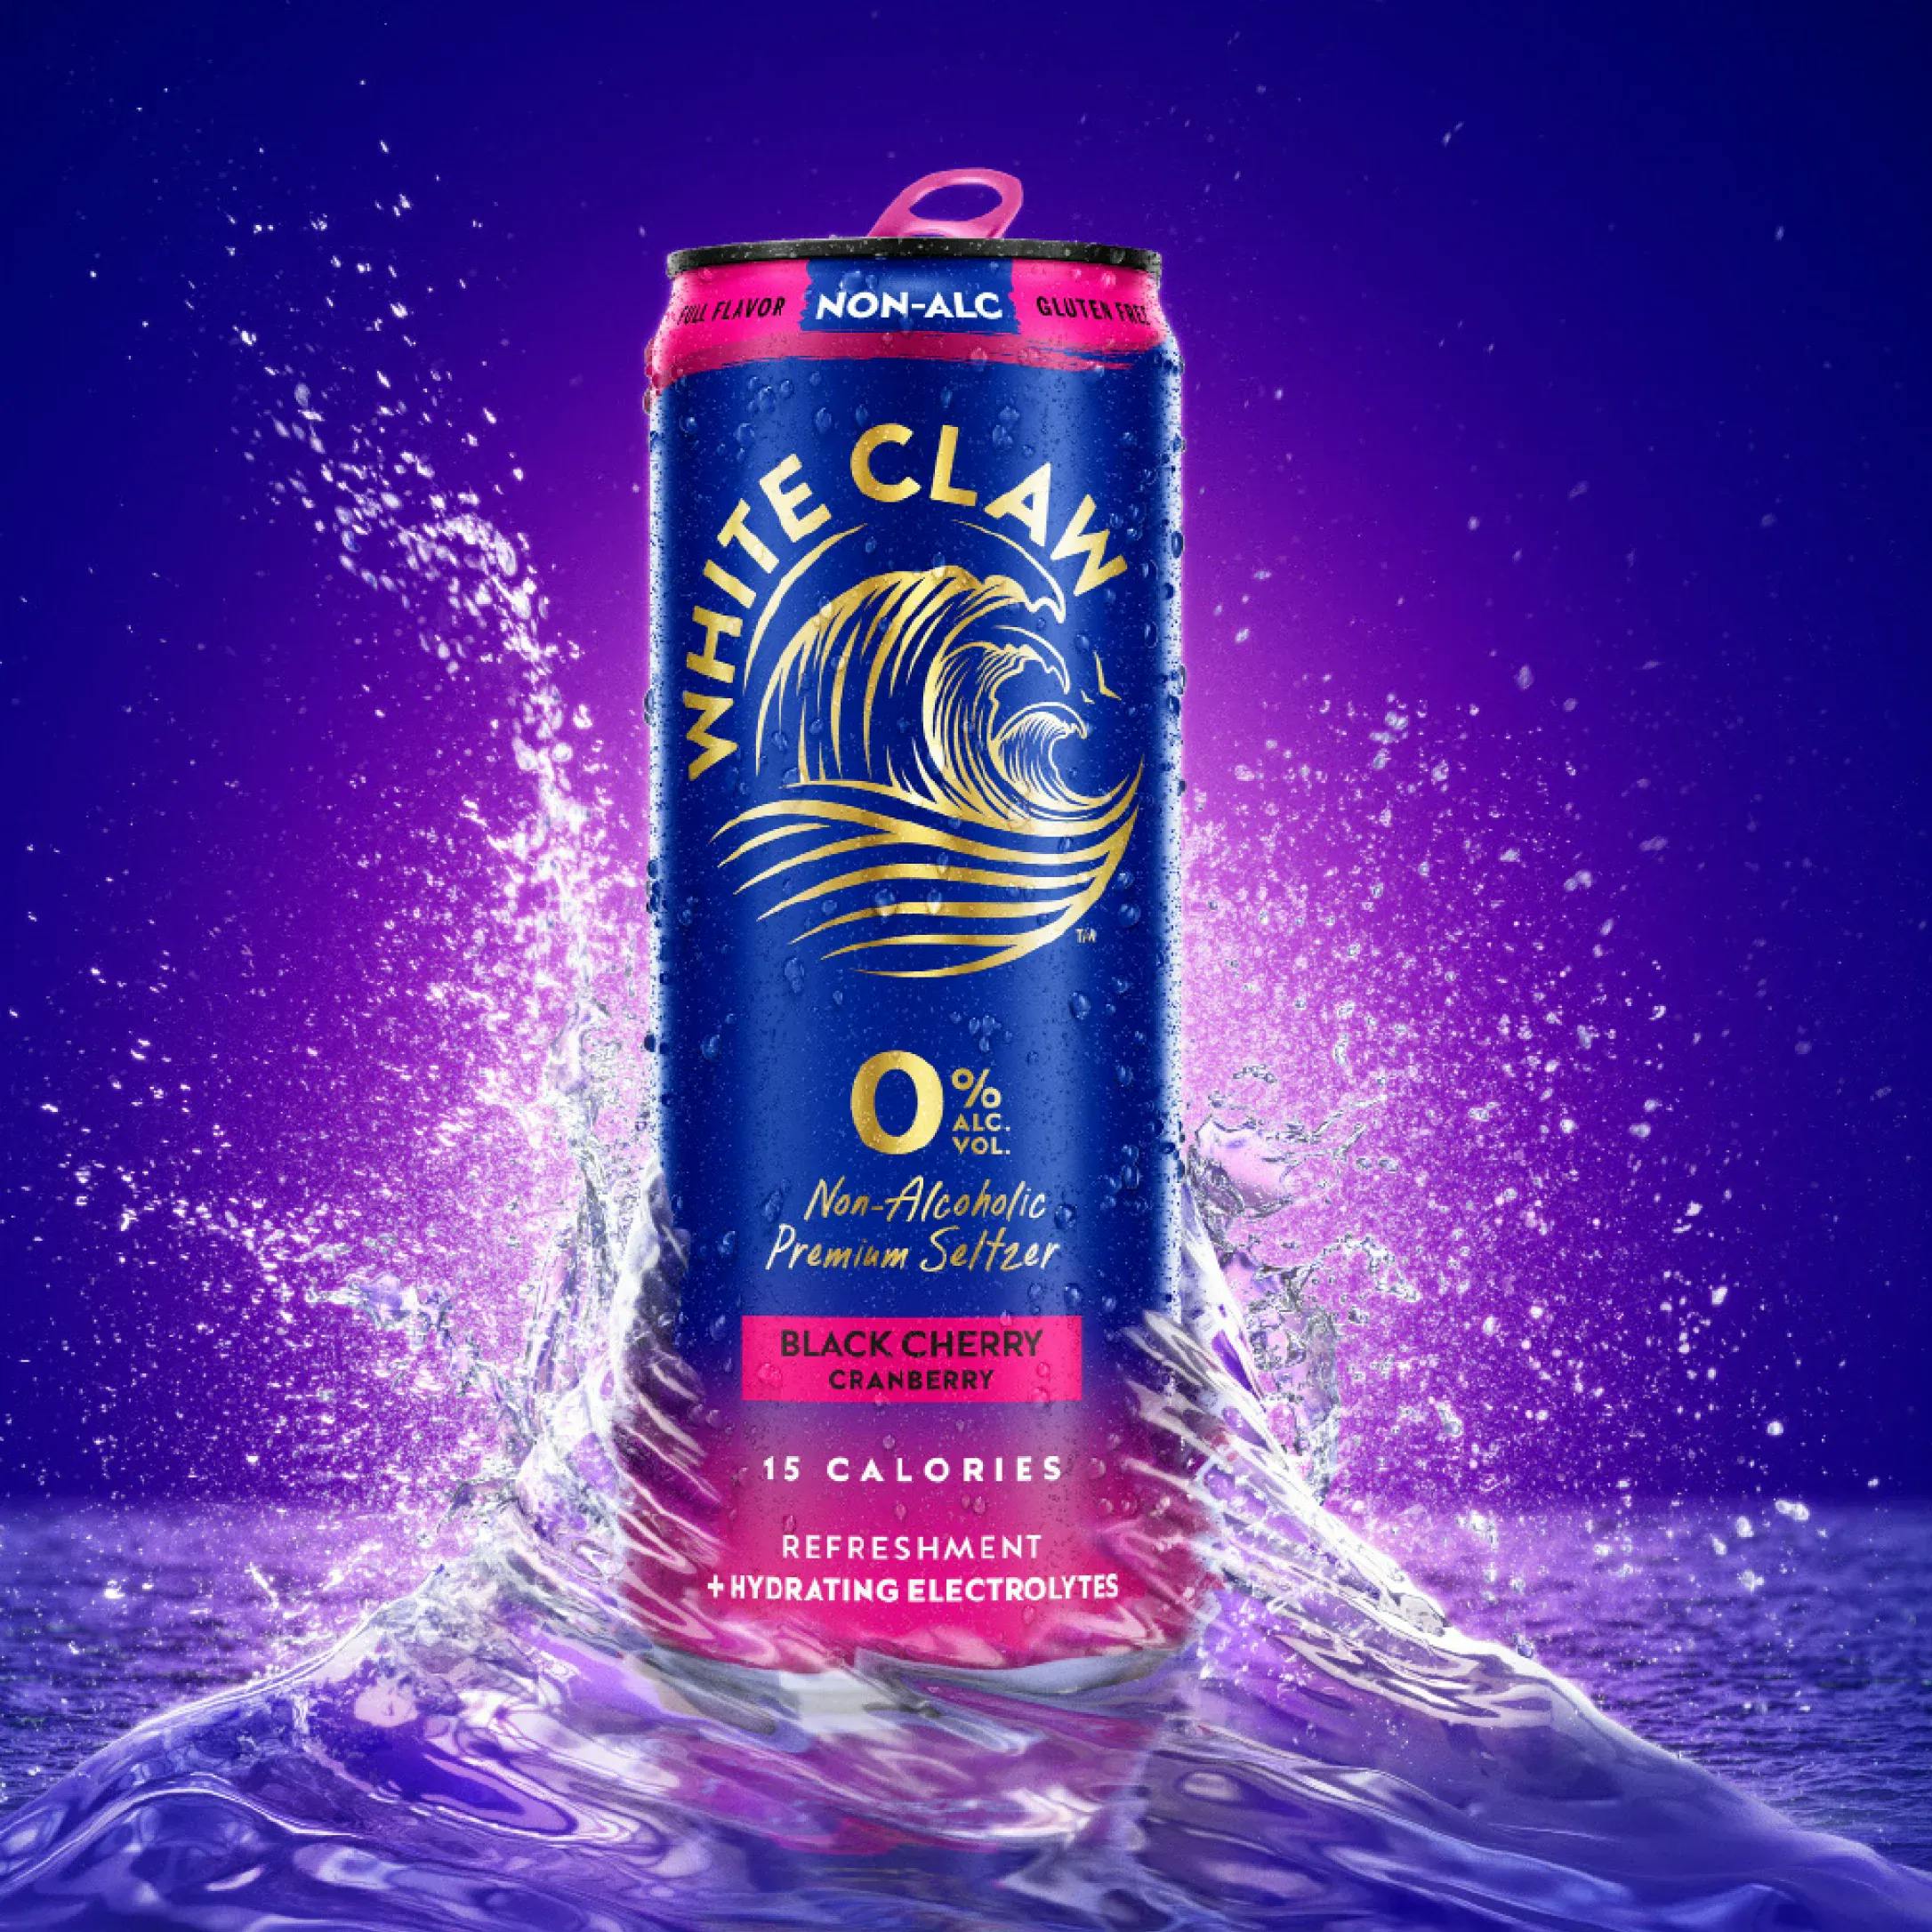 A single can of White Claw 0% Alcohol